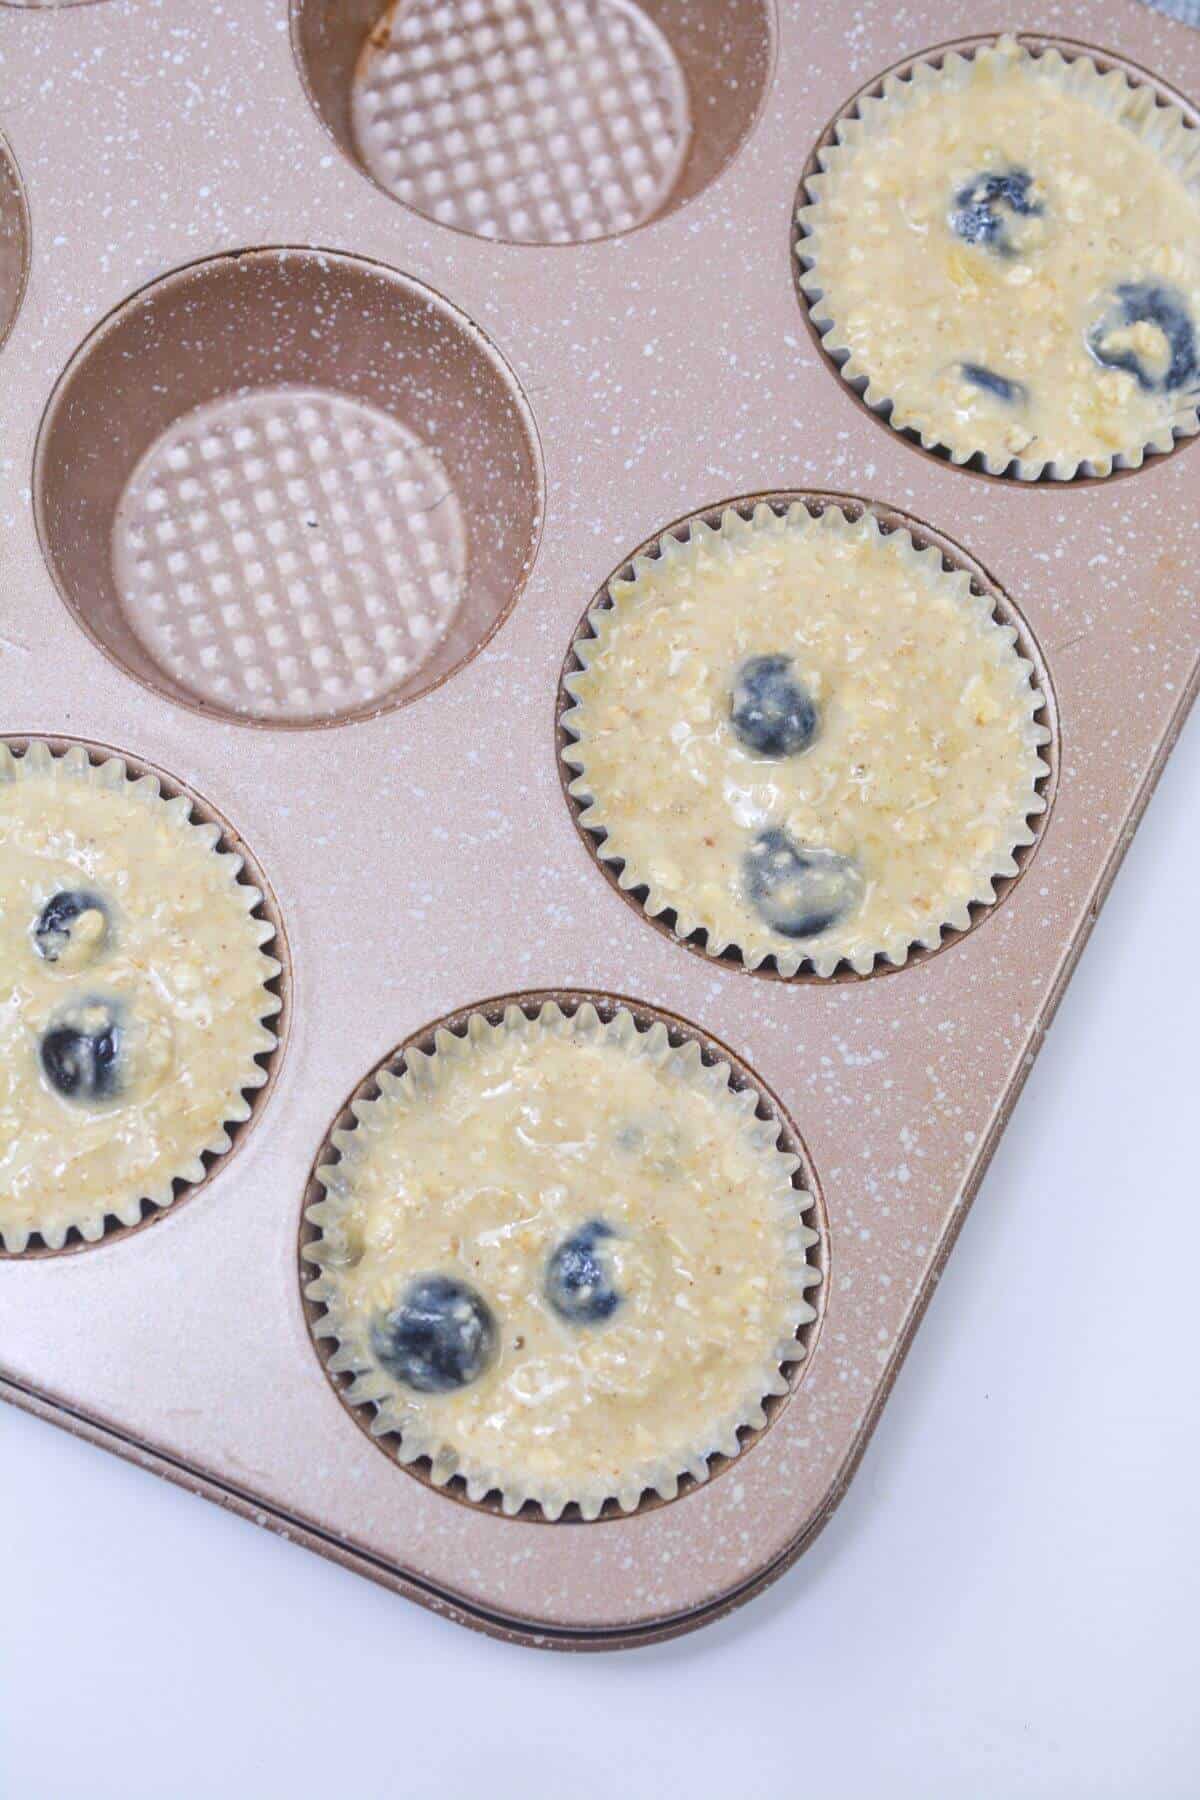 Muffin batter in paper lined muffin tins.